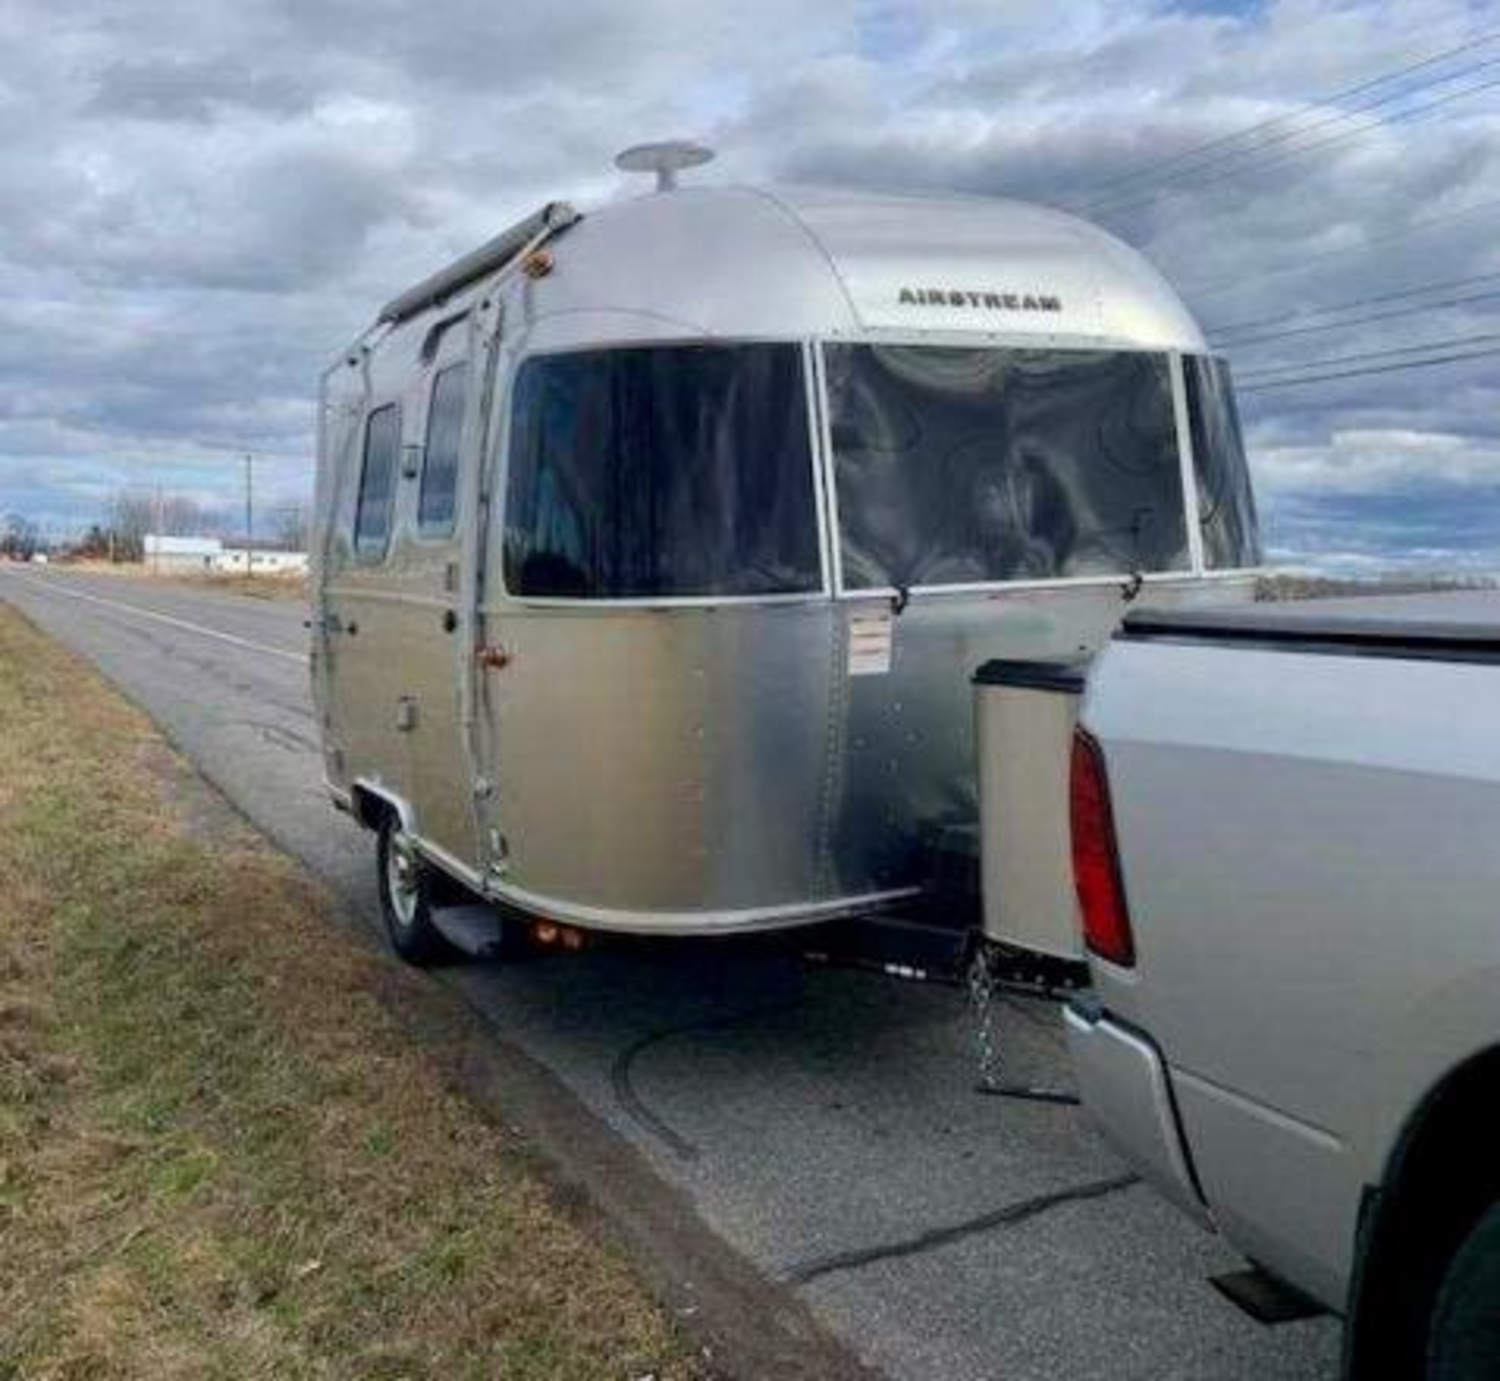 New York pediatrician dies after falling from moving Airstream trailer during family trip